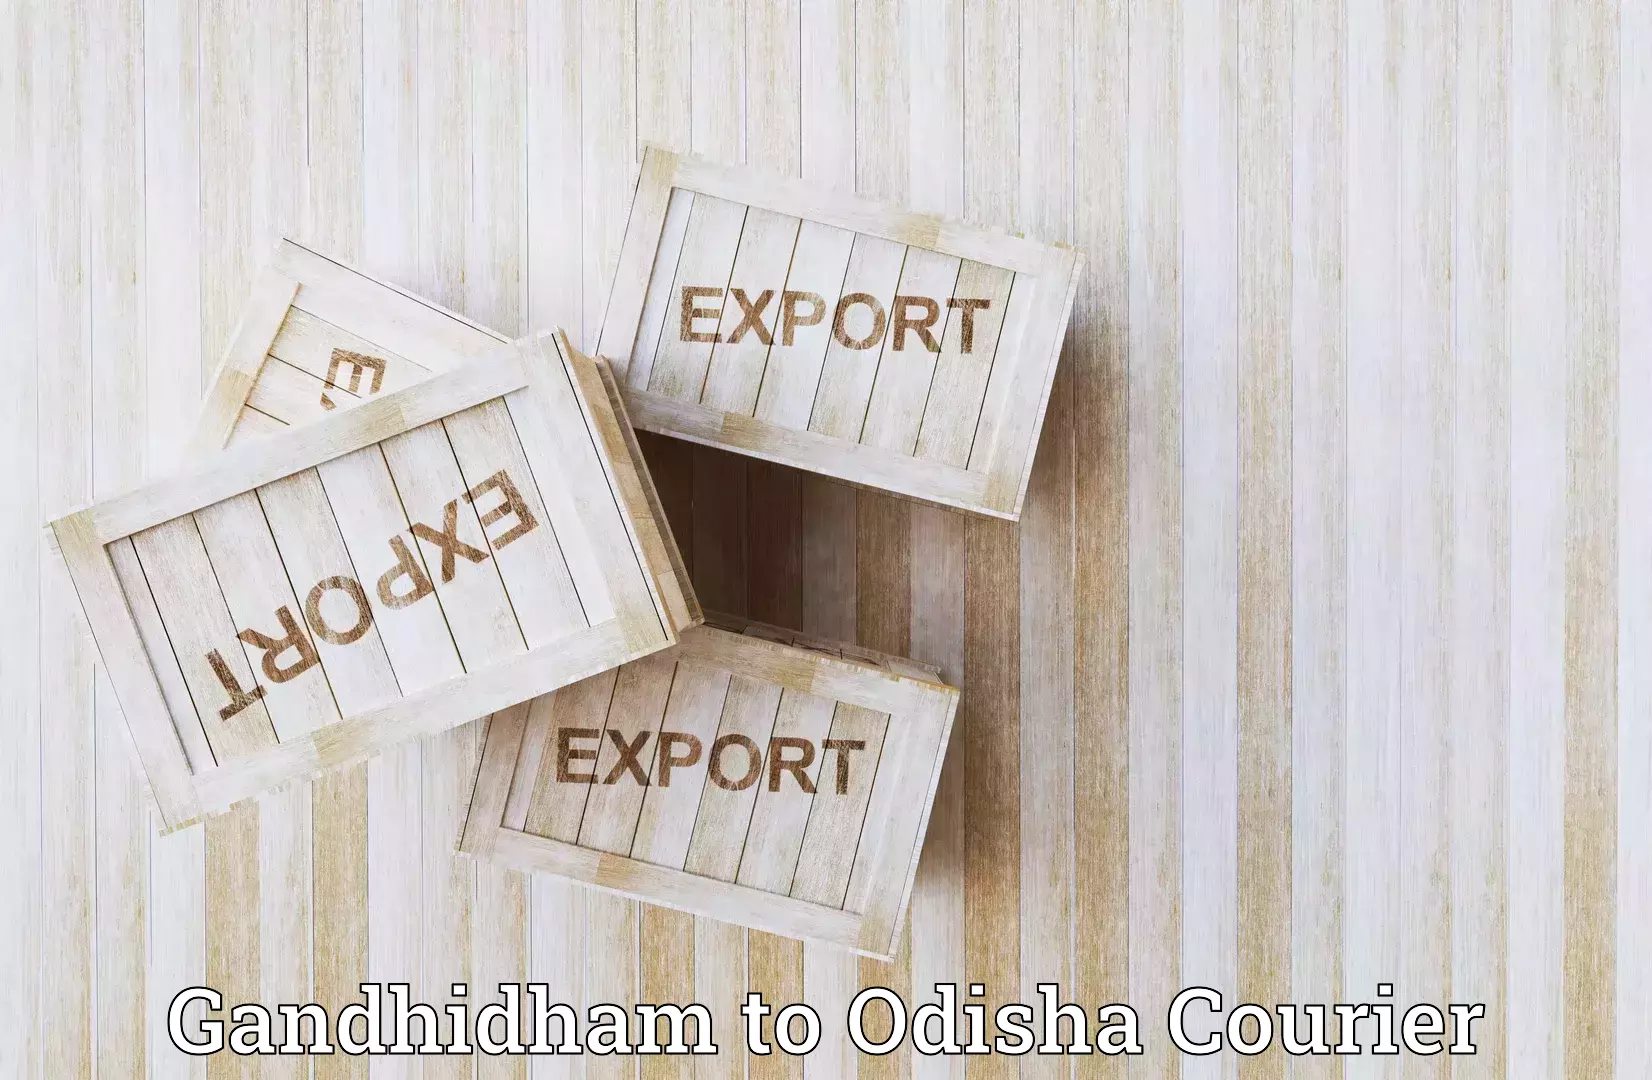 State-of-the-art courier technology Gandhidham to Paradip Port